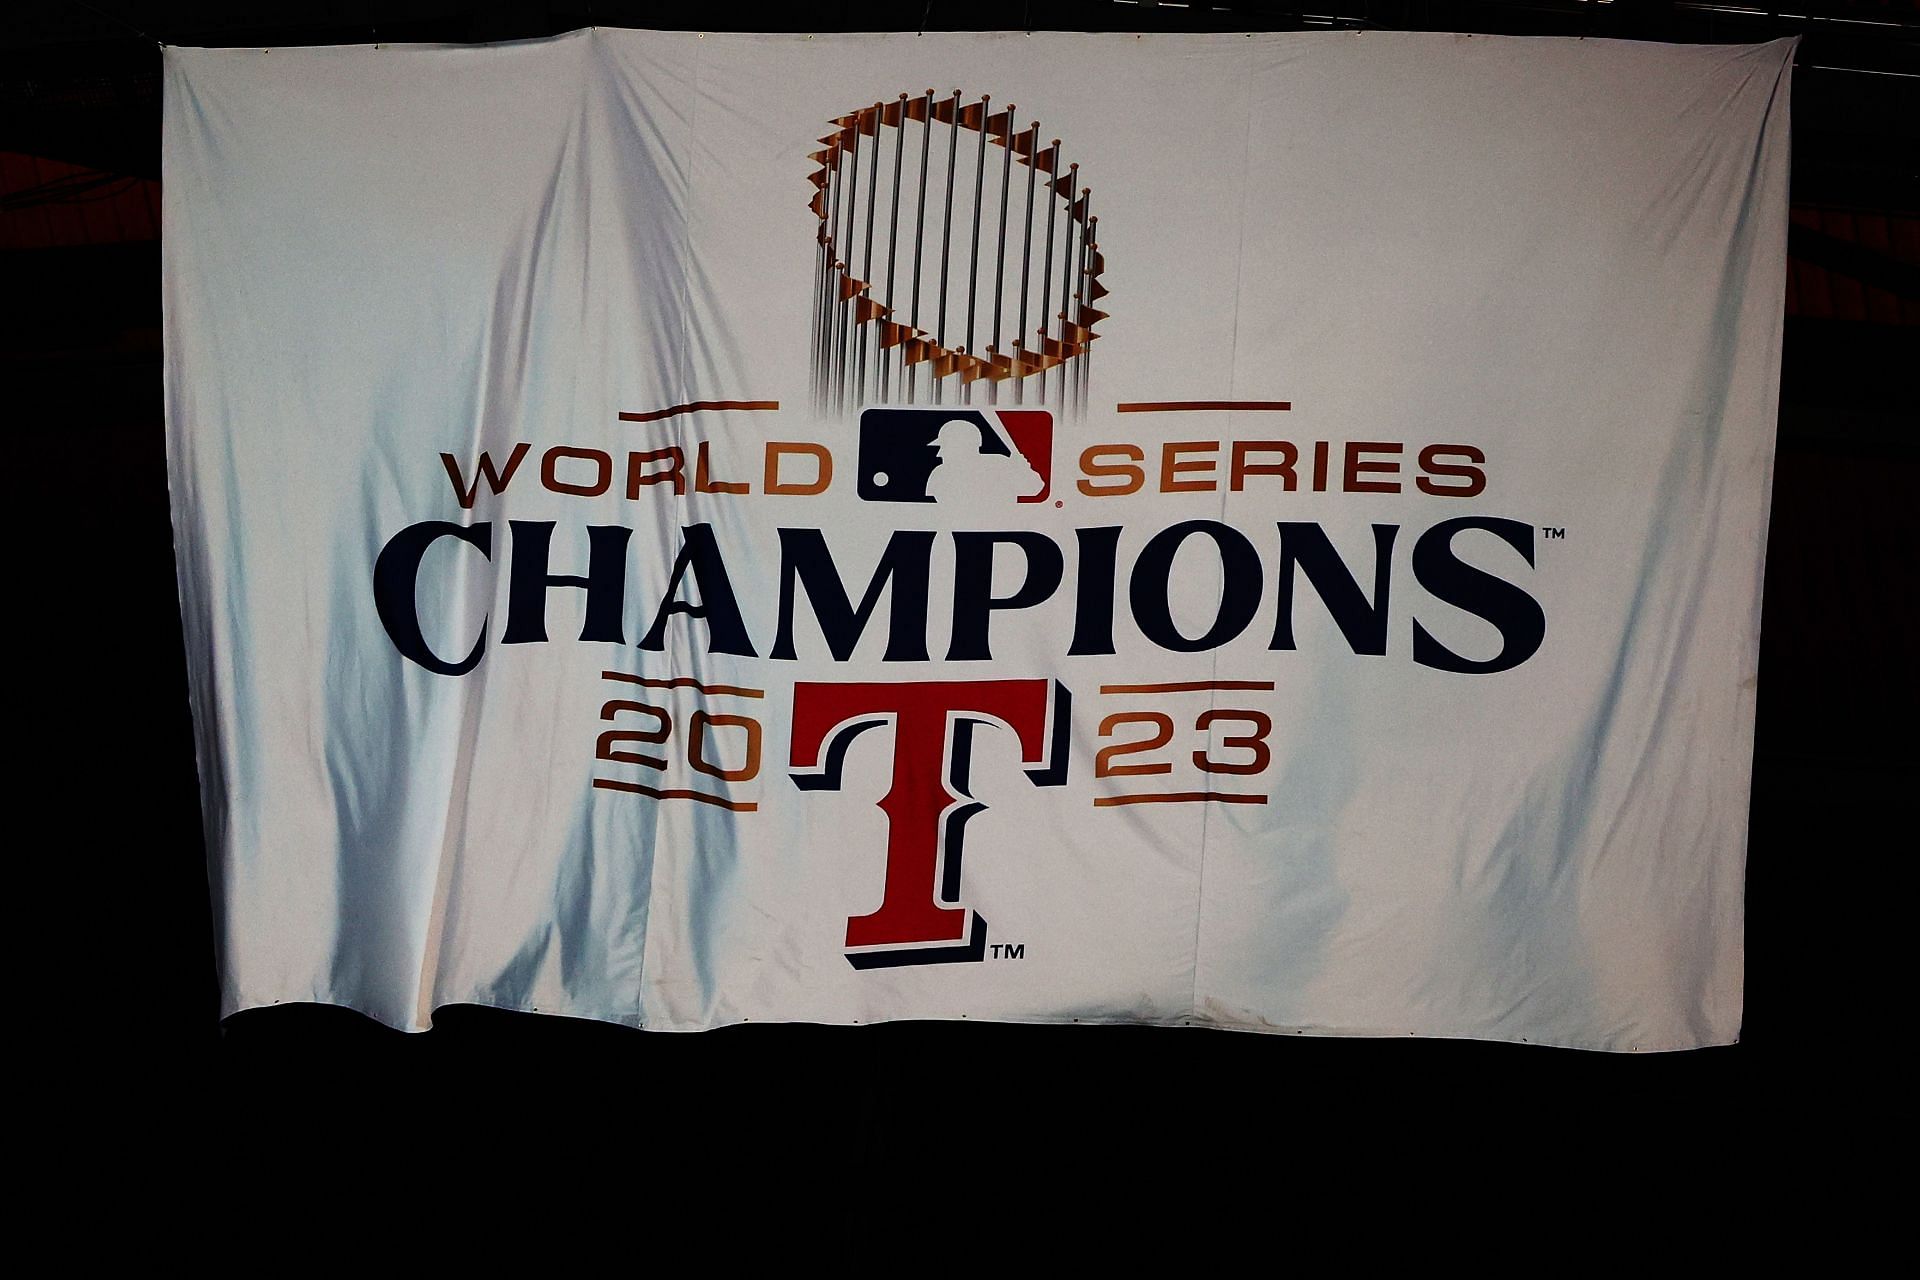 The Texas Rangers recently raised their World Series Champions banner at Globe Life Field in Arlington, TX.